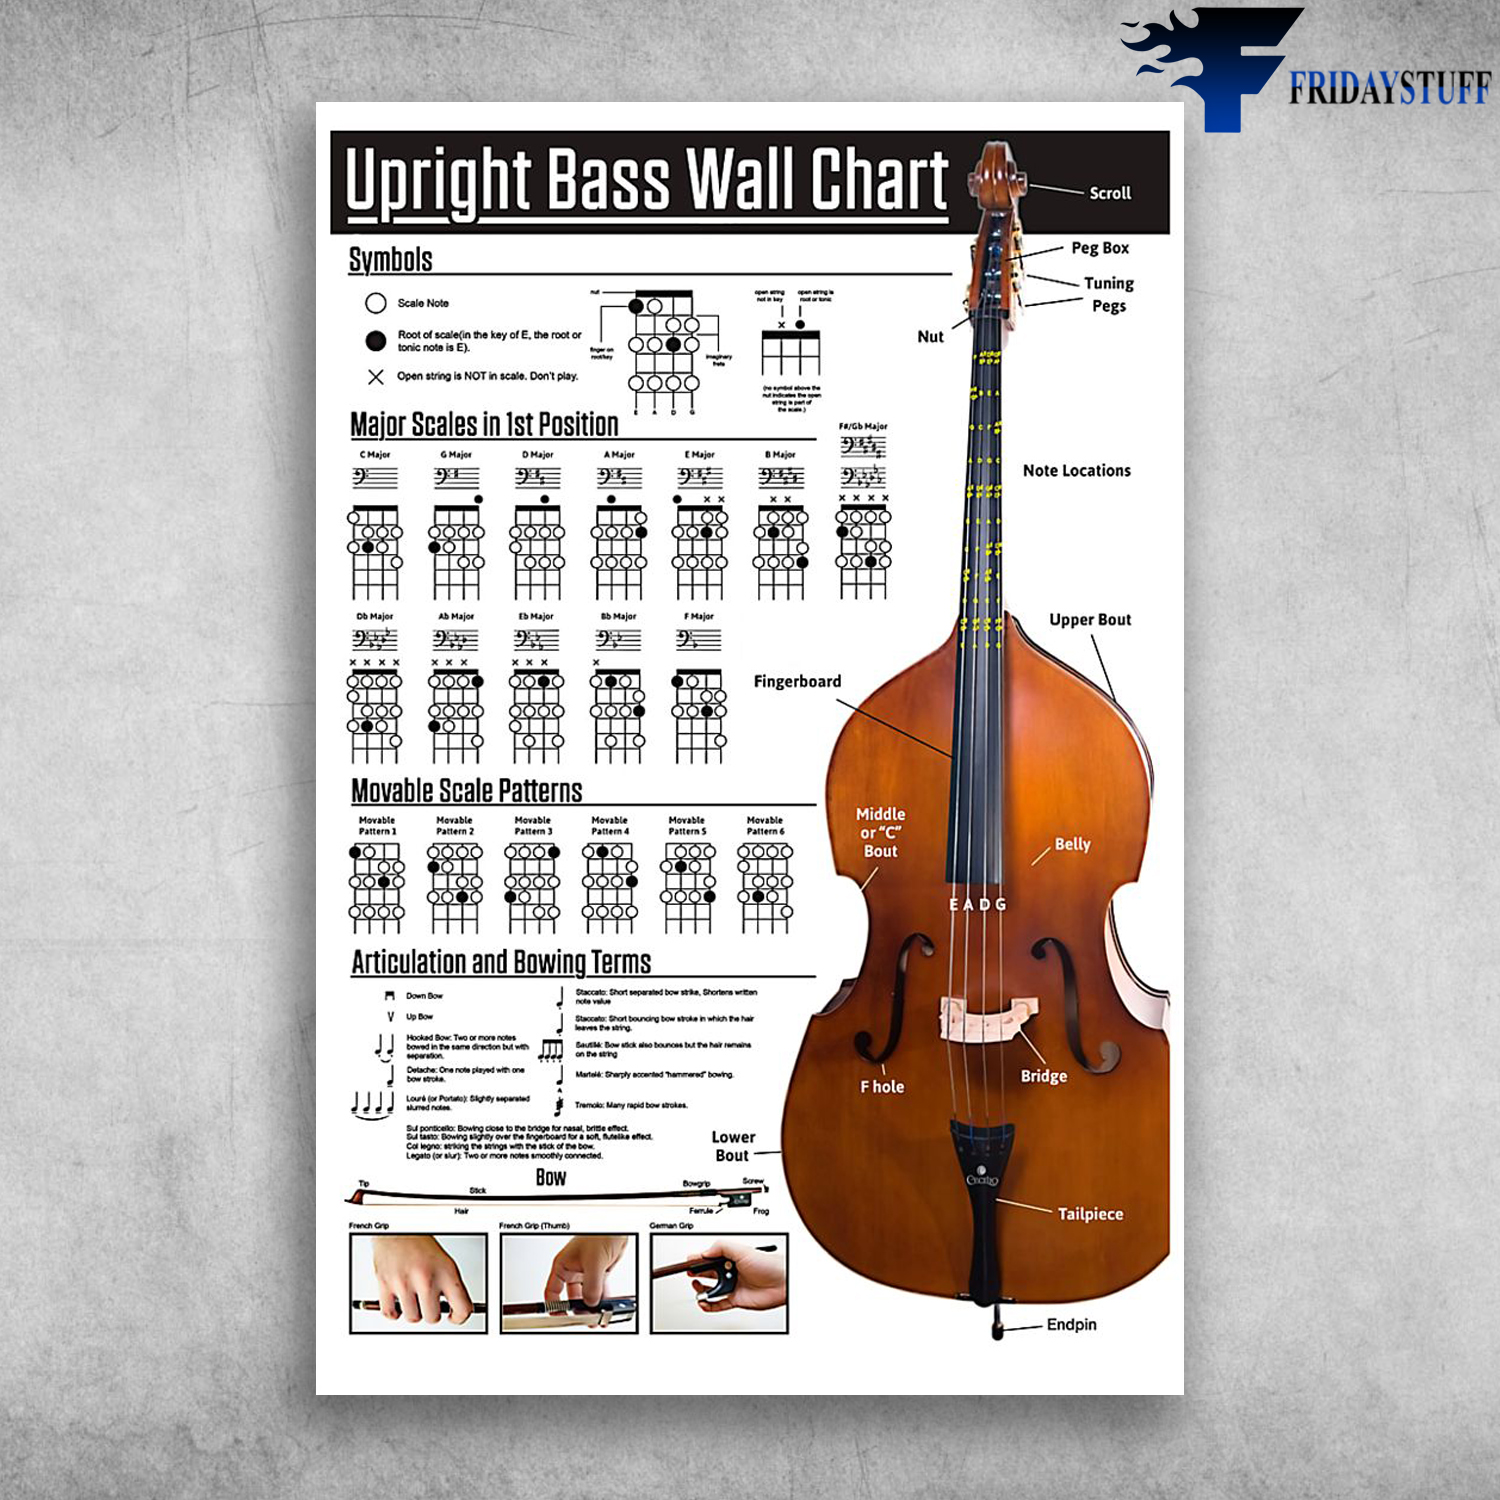 Upright Bass Wall Chart Major Scales In 1st Position - FridayStuff